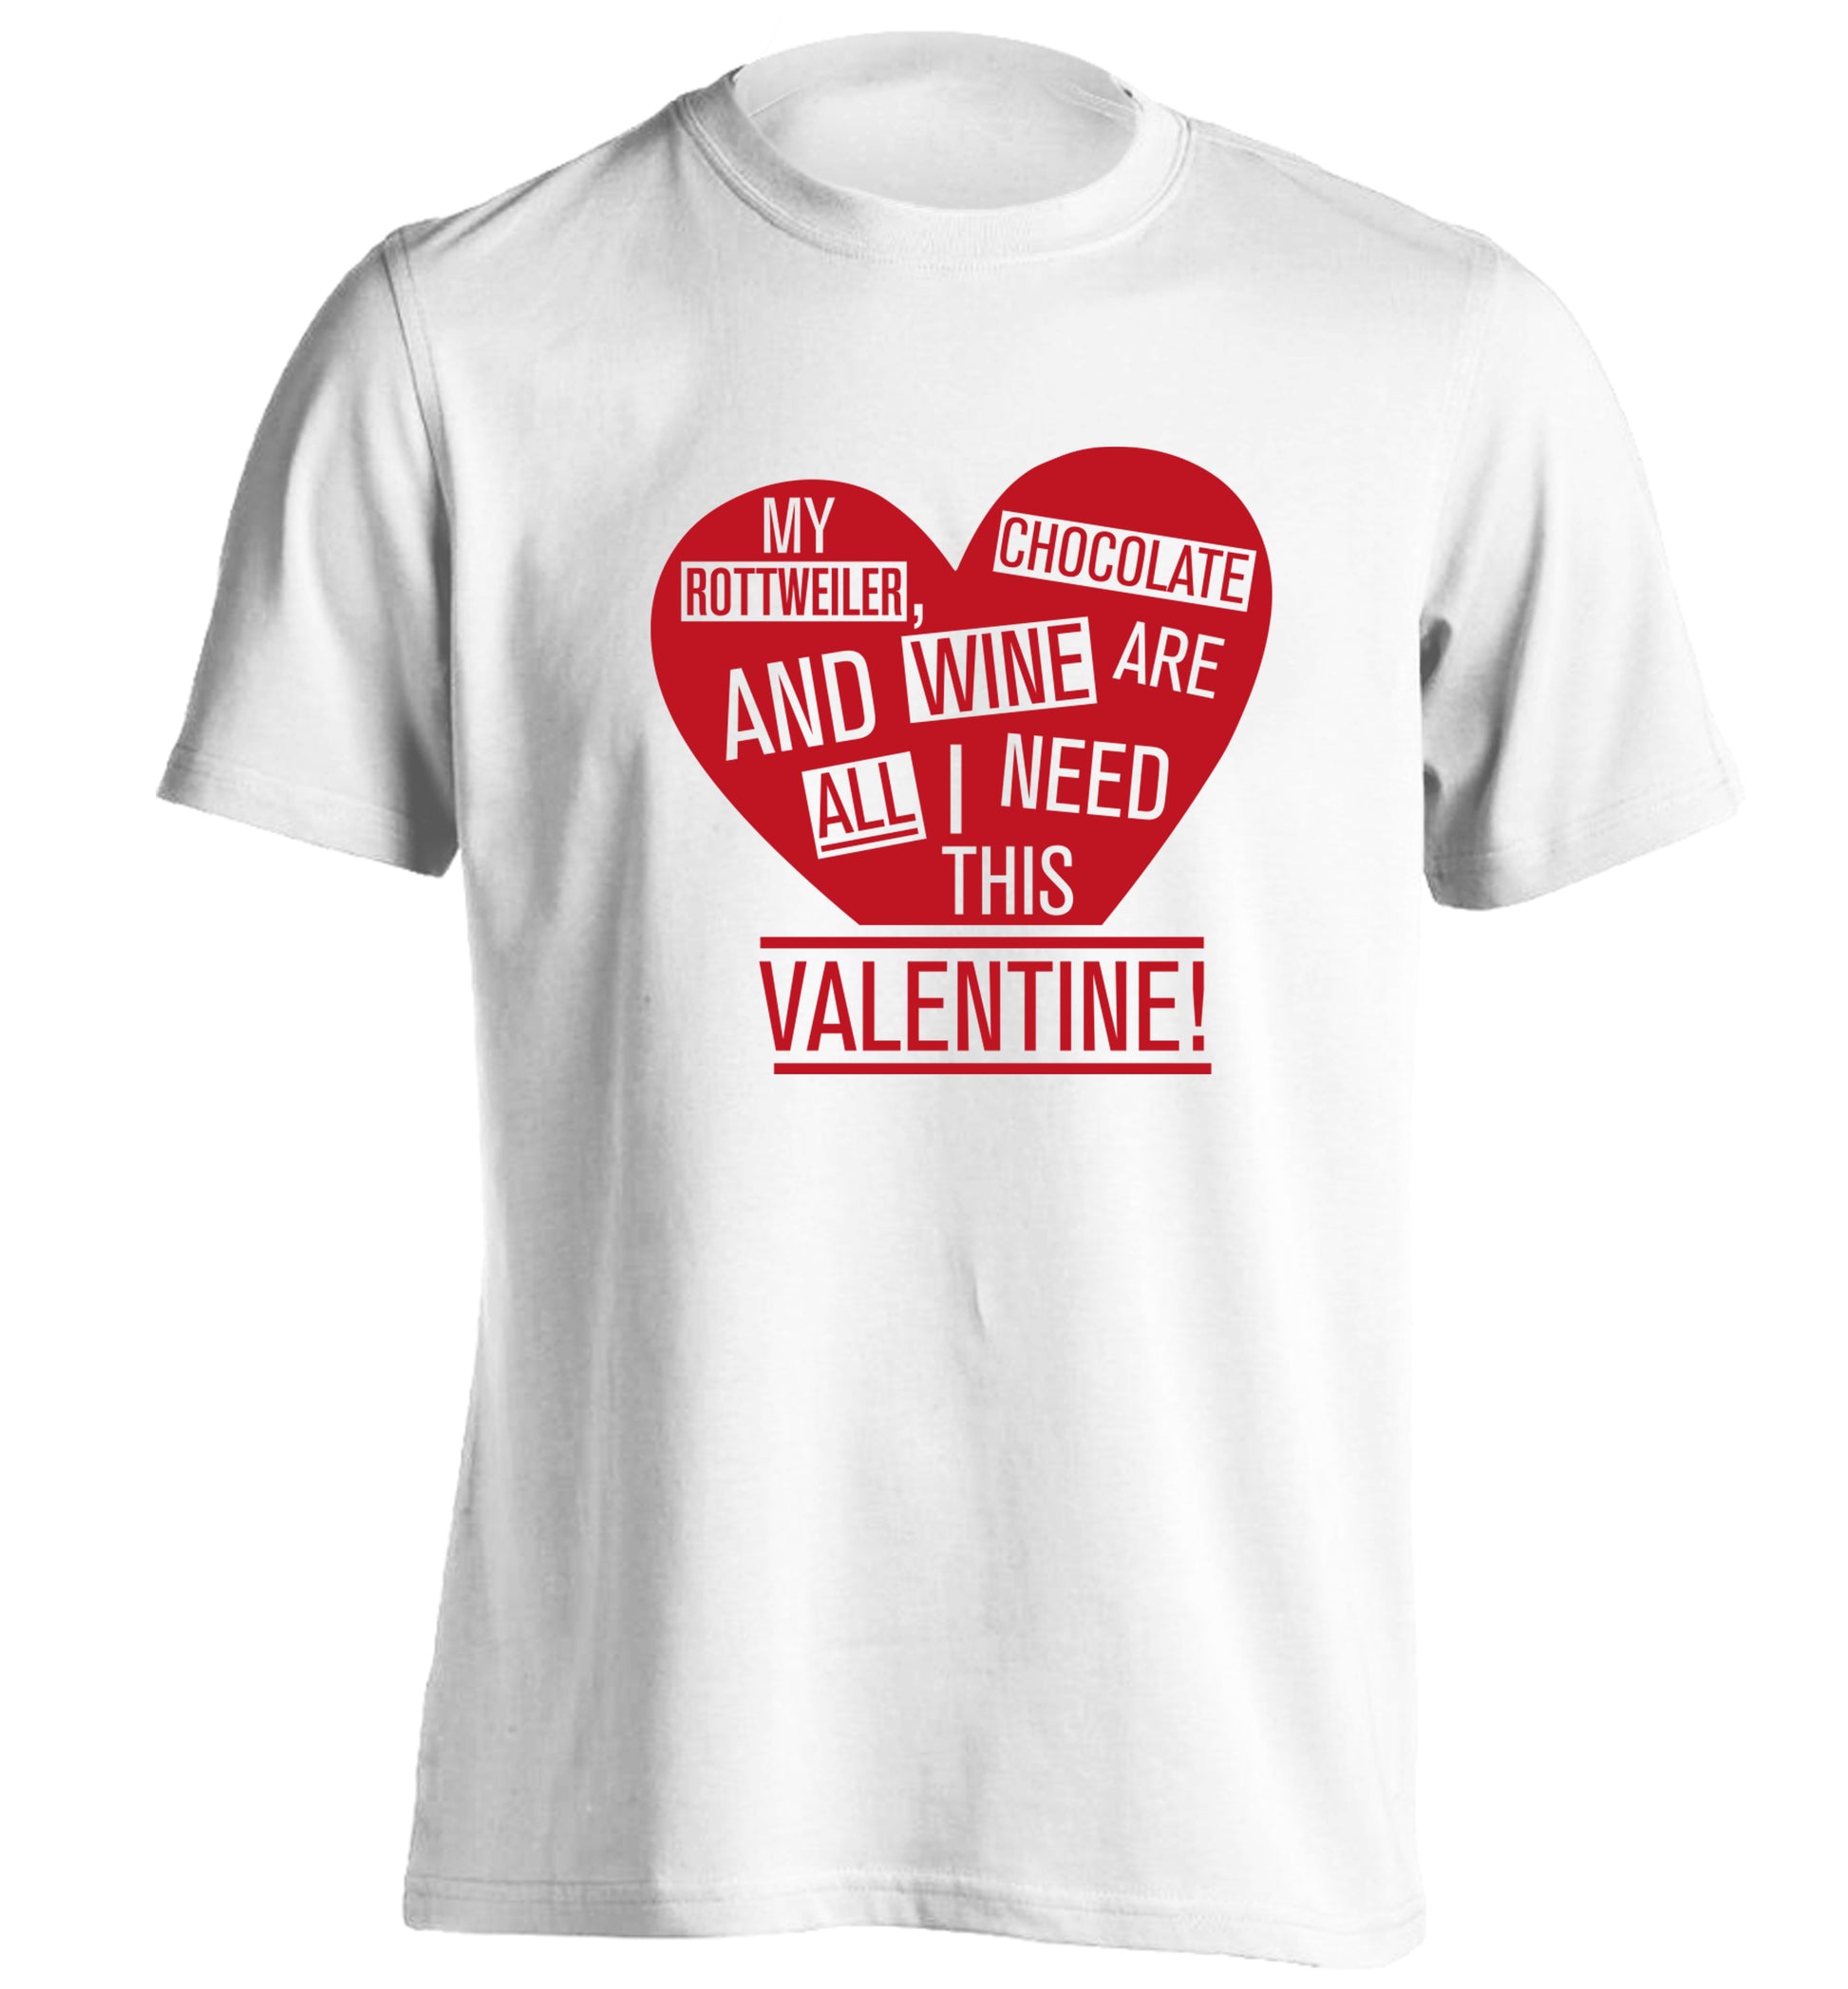 My rottweiler, chocolate and wine are all I need this valentine! adults unisex white Tshirt 2XL